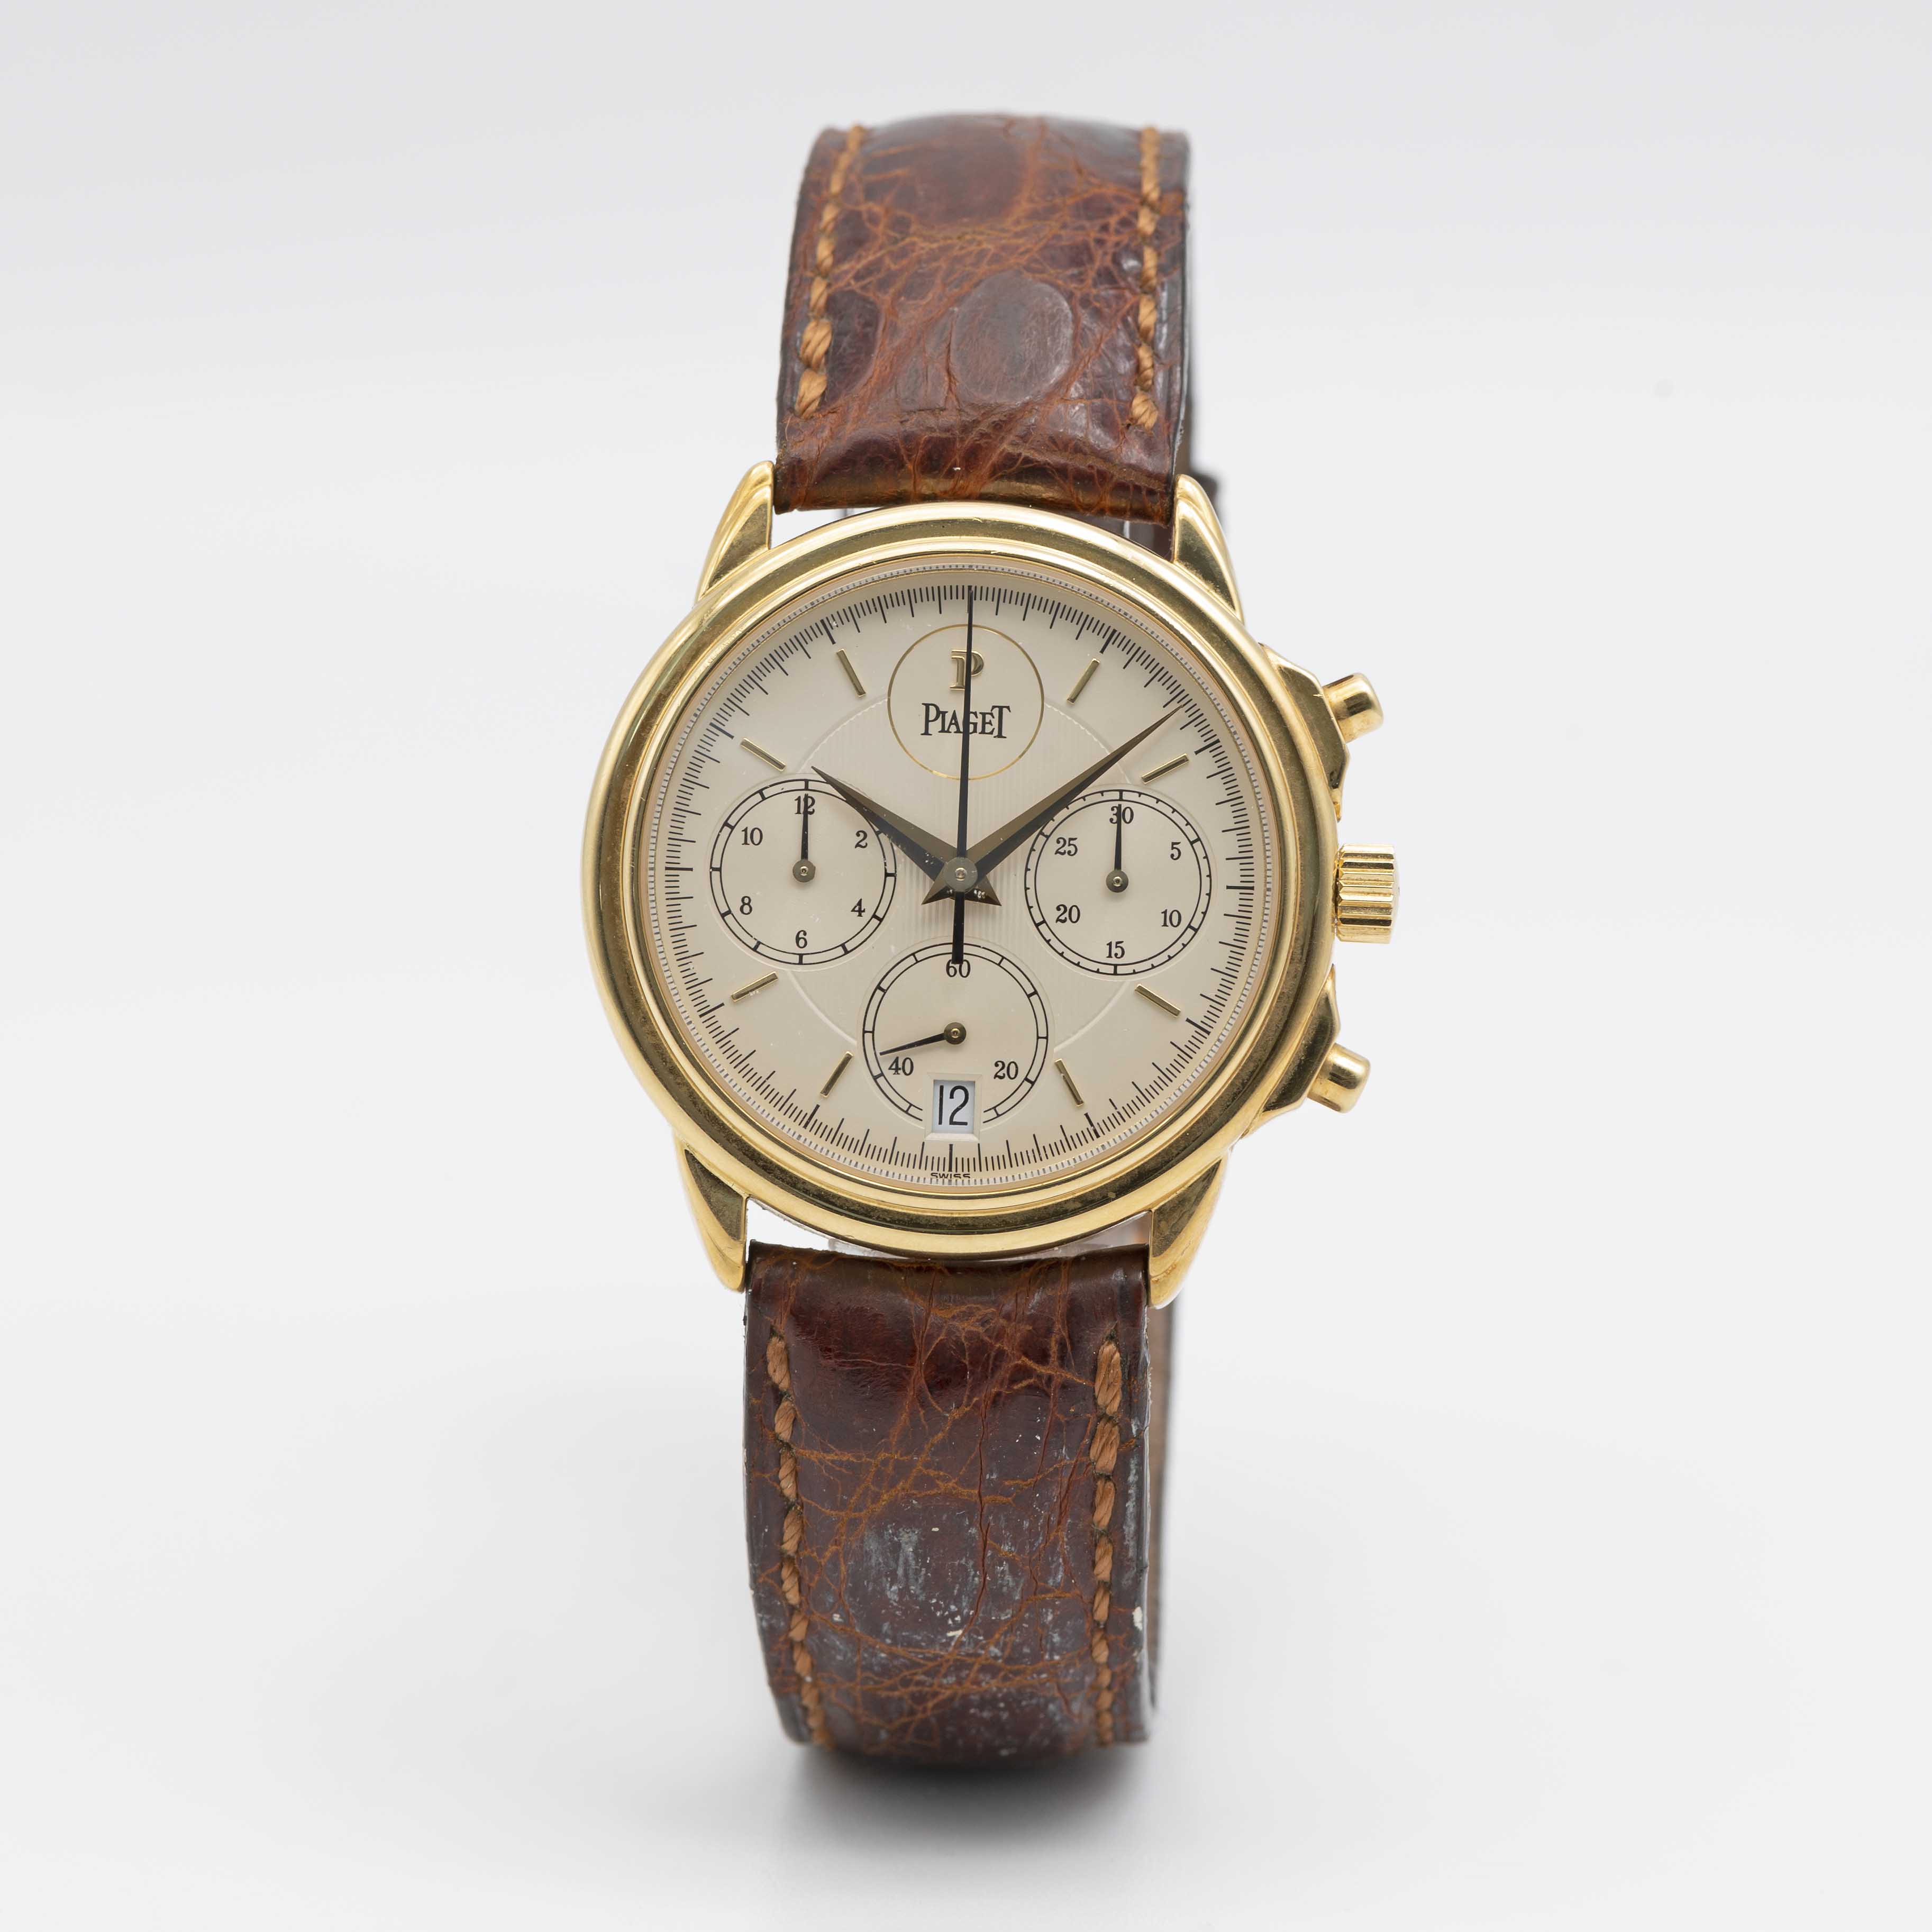 A FINE GENTLEMAN'S 18K SOLID GOLD PIAGET GOUVERNEUR AUTOMATIC CHRONOGRAPH WRIST WATCH CIRCA 1998, - Image 2 of 9